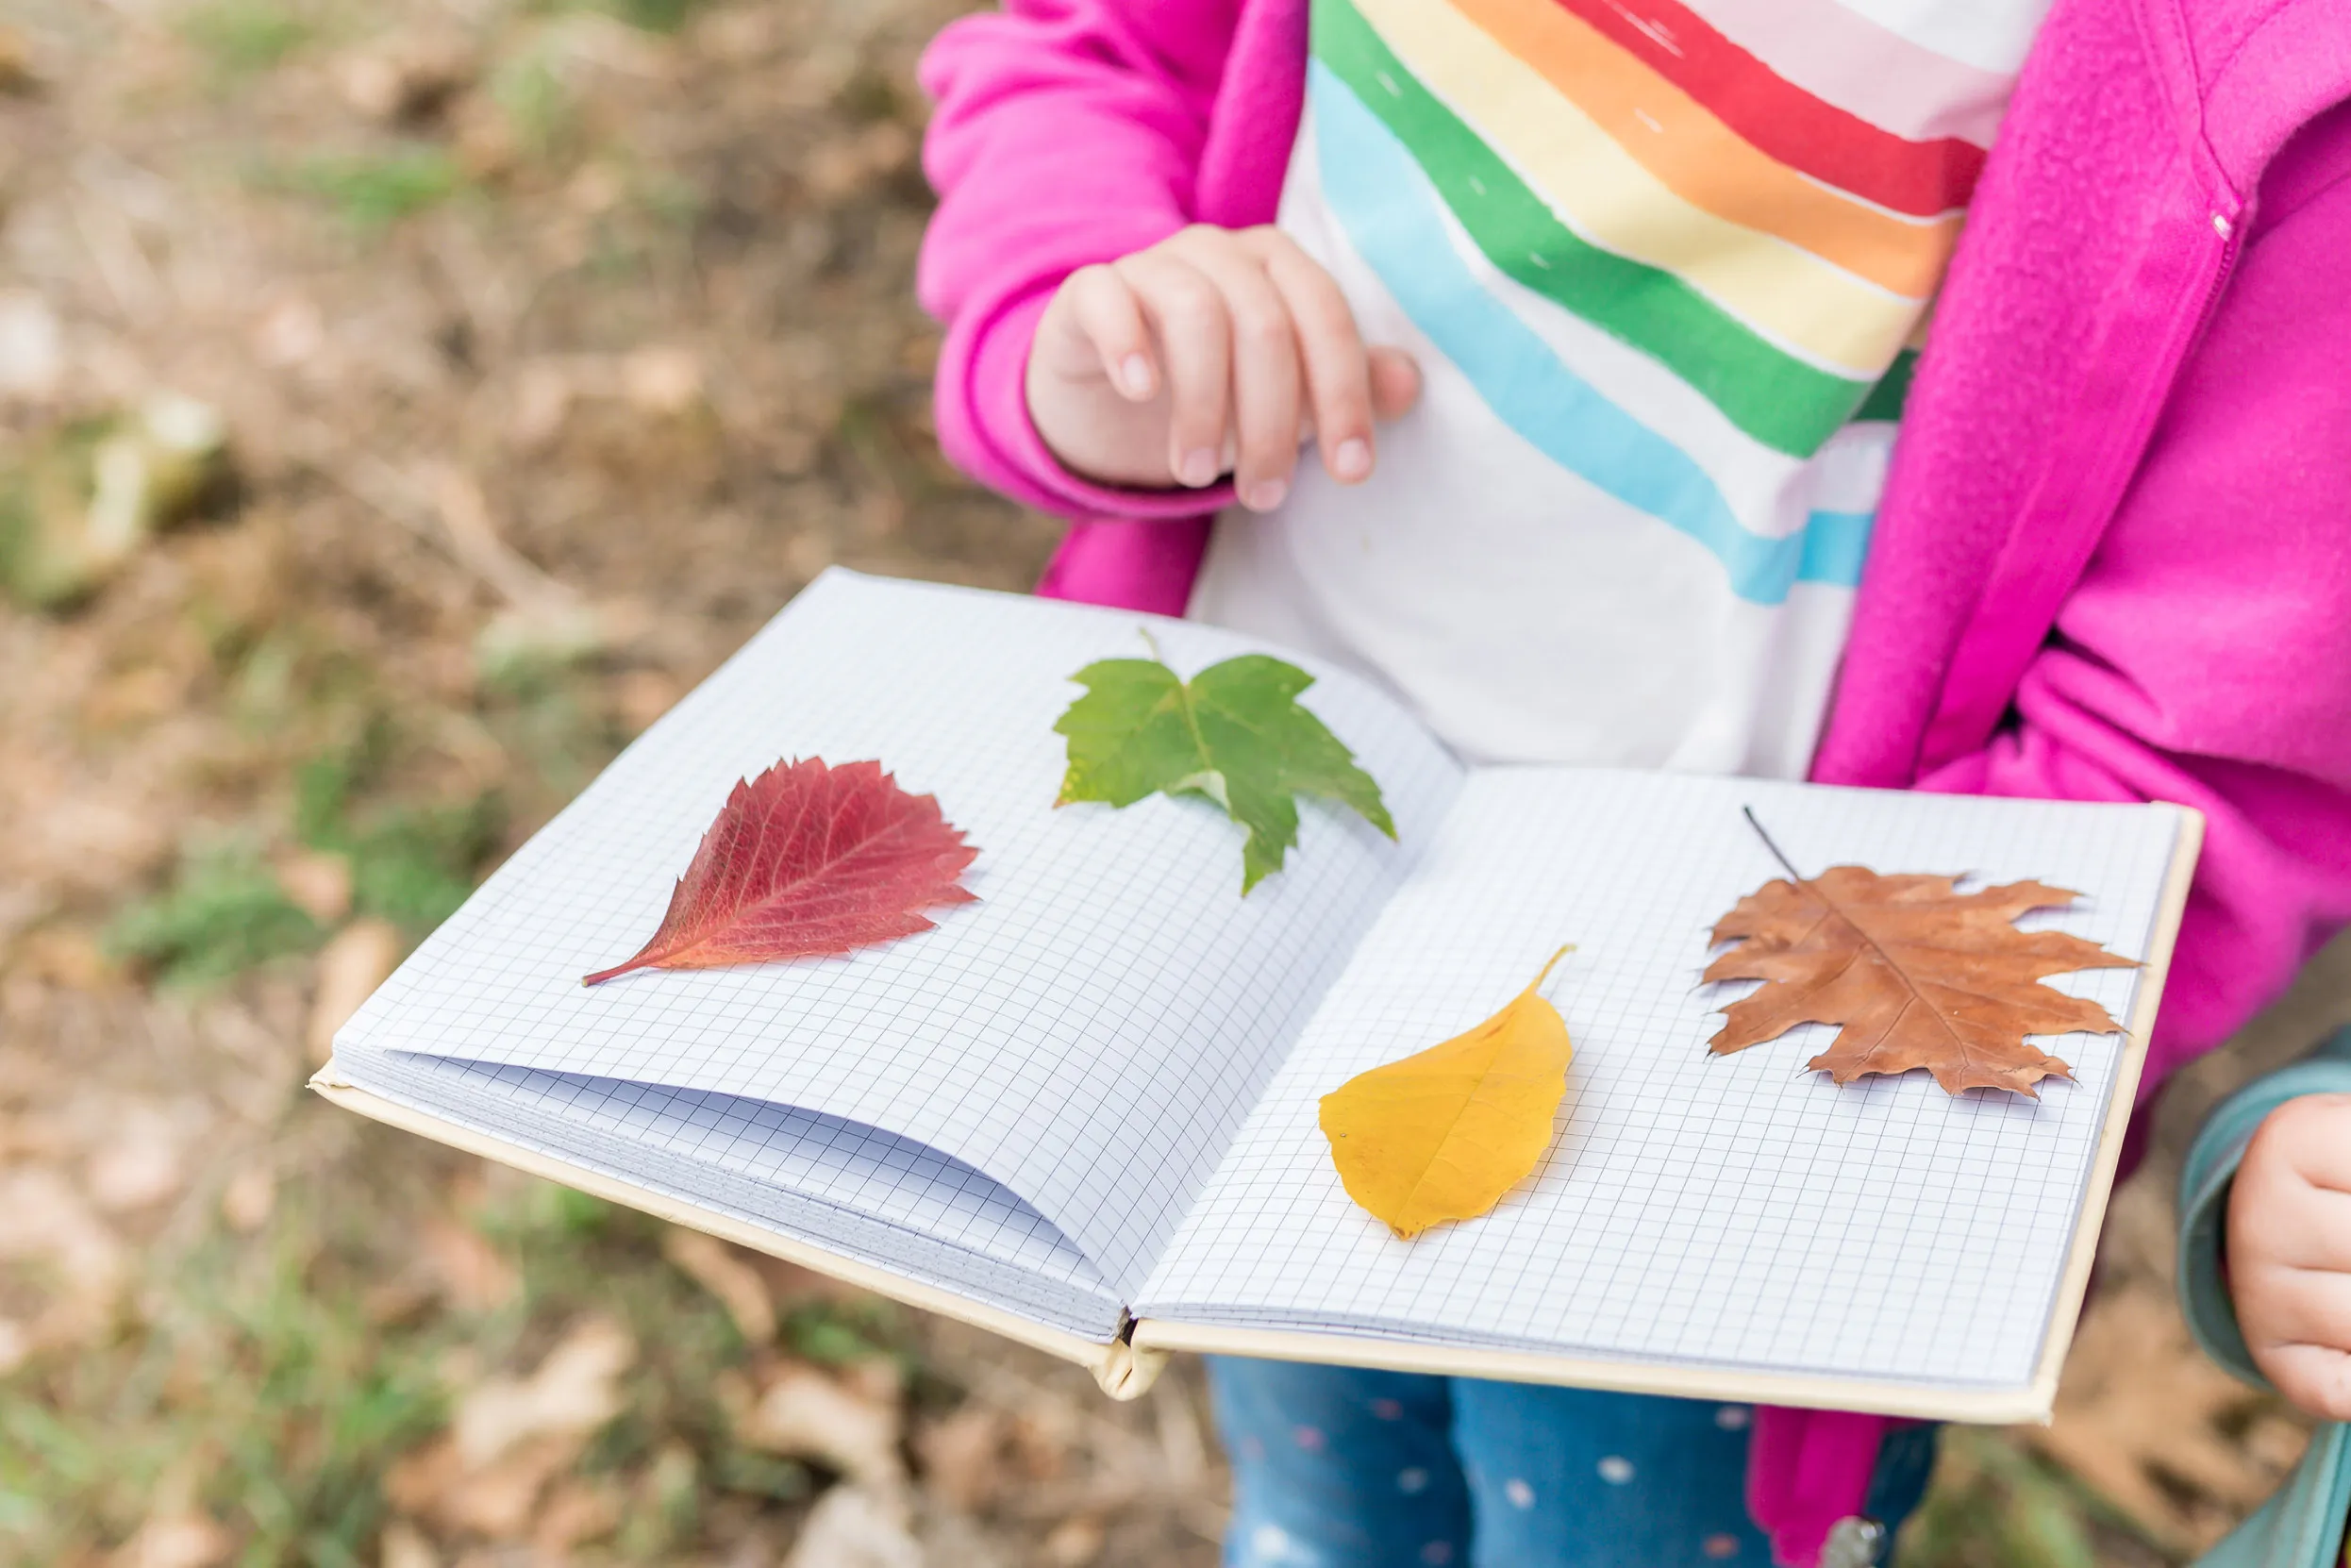 A child holding open an empty notebook placing leaves on the pages.